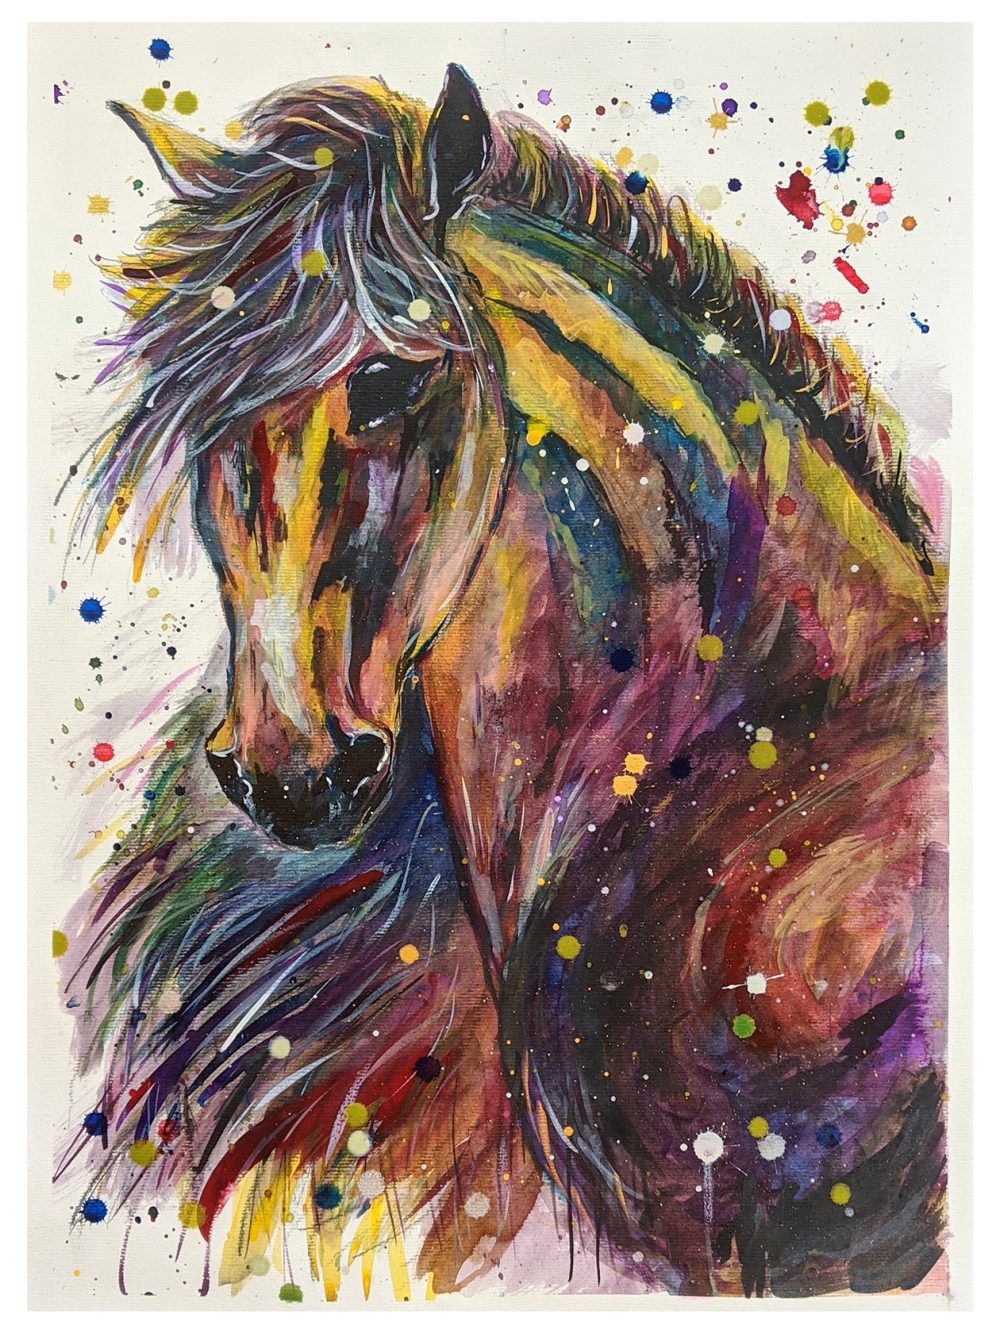 Joey DeSilva, Stallion, 2020, graphite, ink and acrylics on watercolor paper, 23" x 16.5"